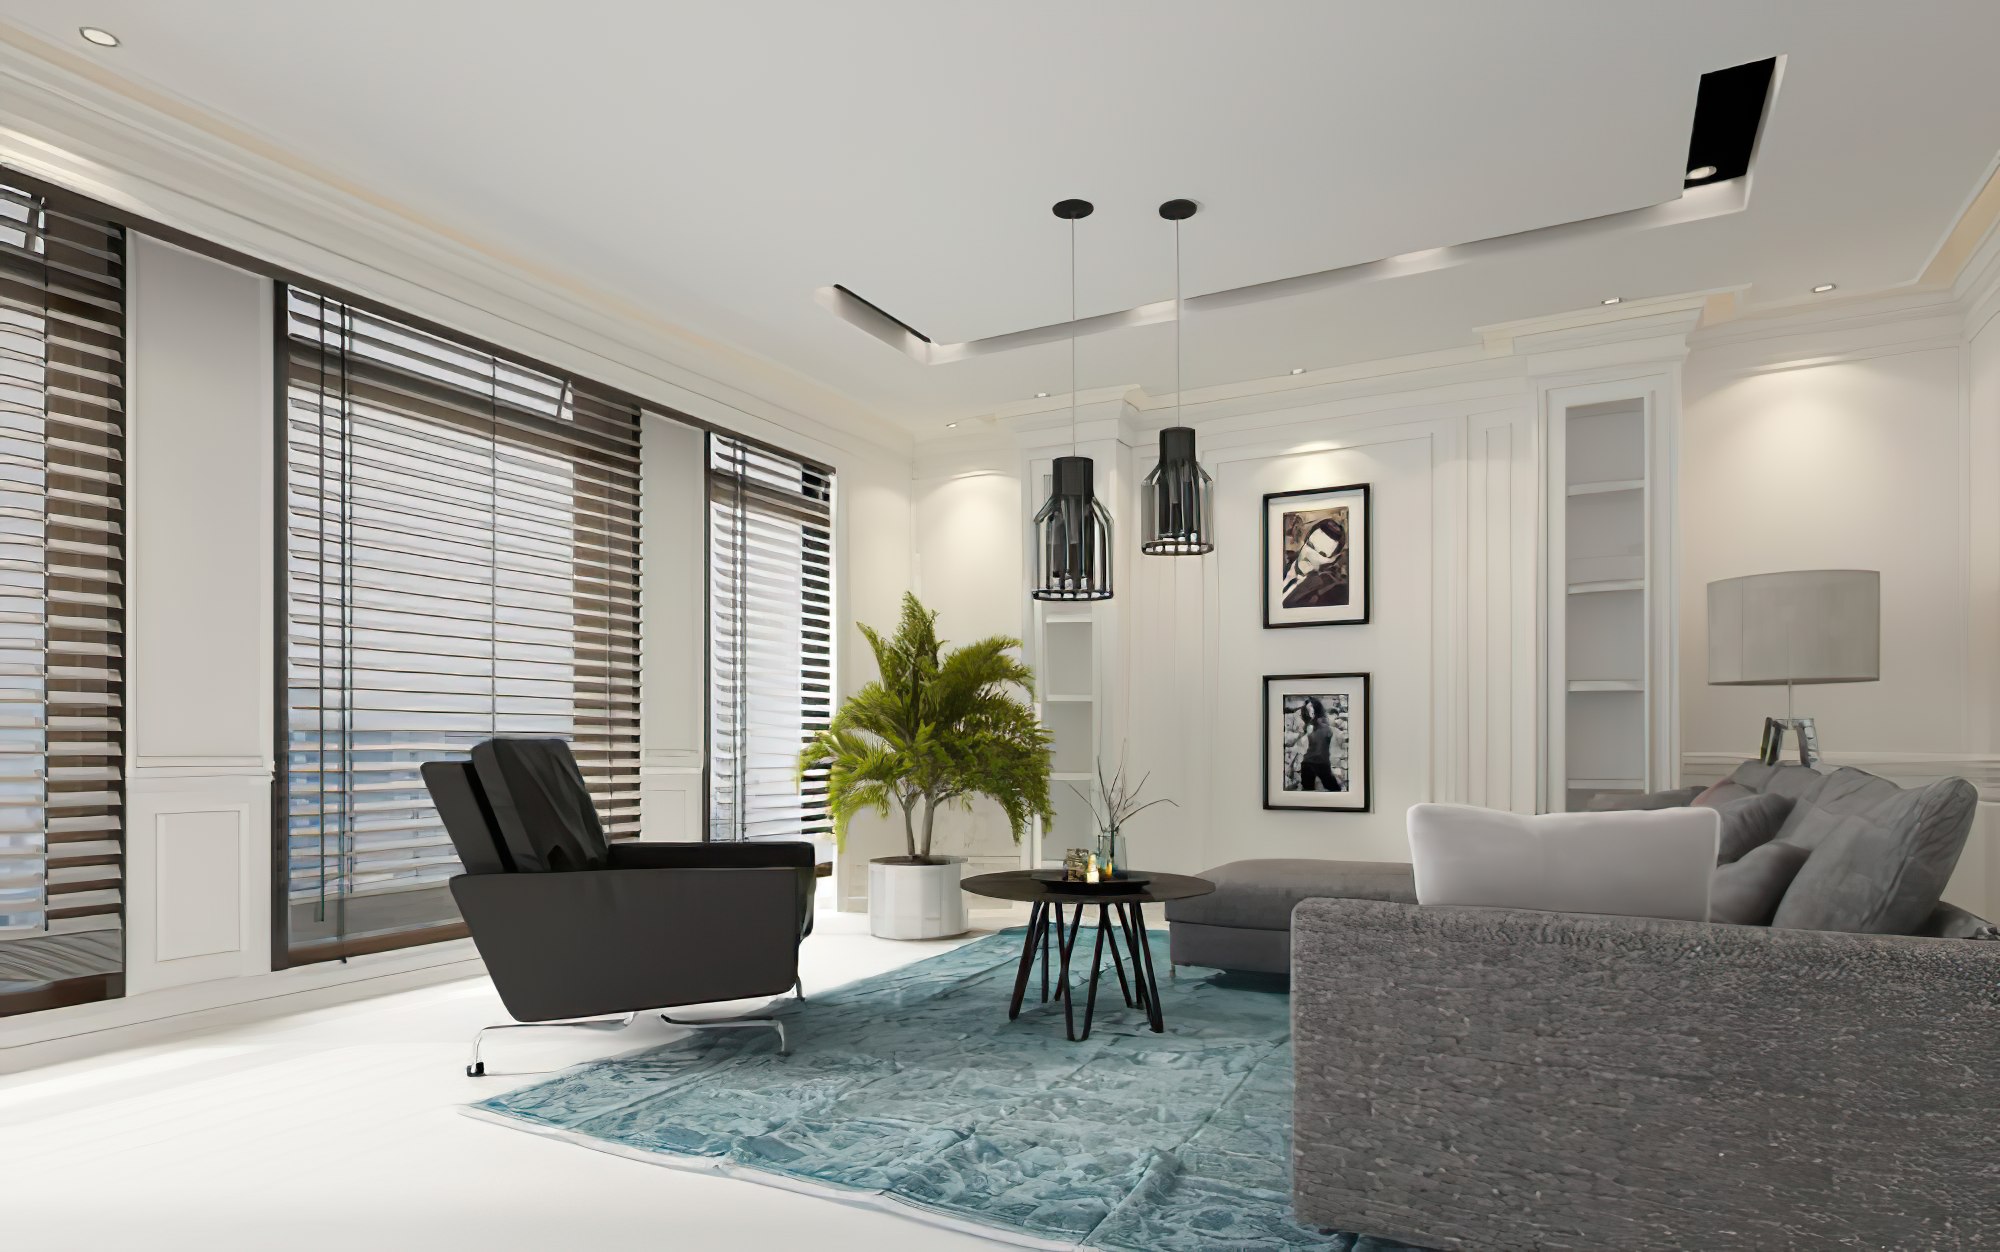 A living room with blinds installed by Architectural Window Treatments in a luxury home.